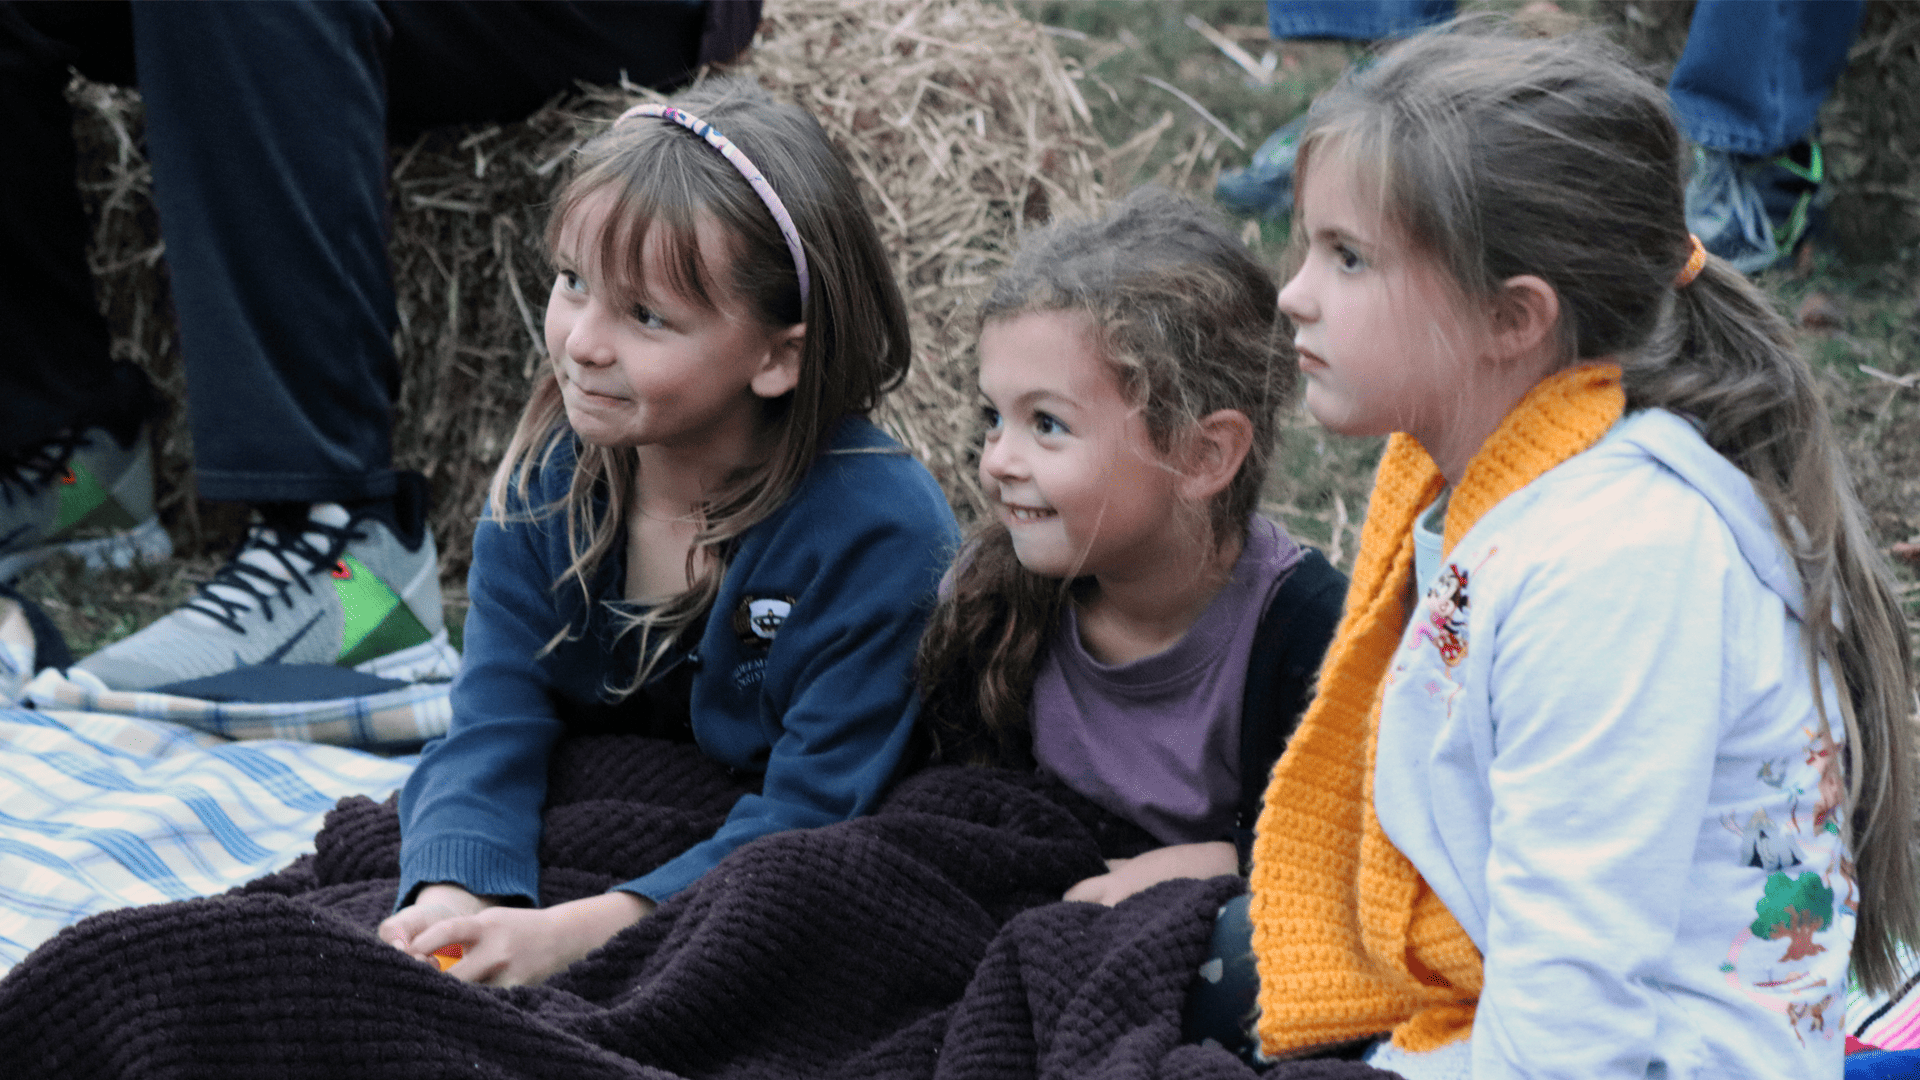 Kindergarten students watching an outside movie in the fall